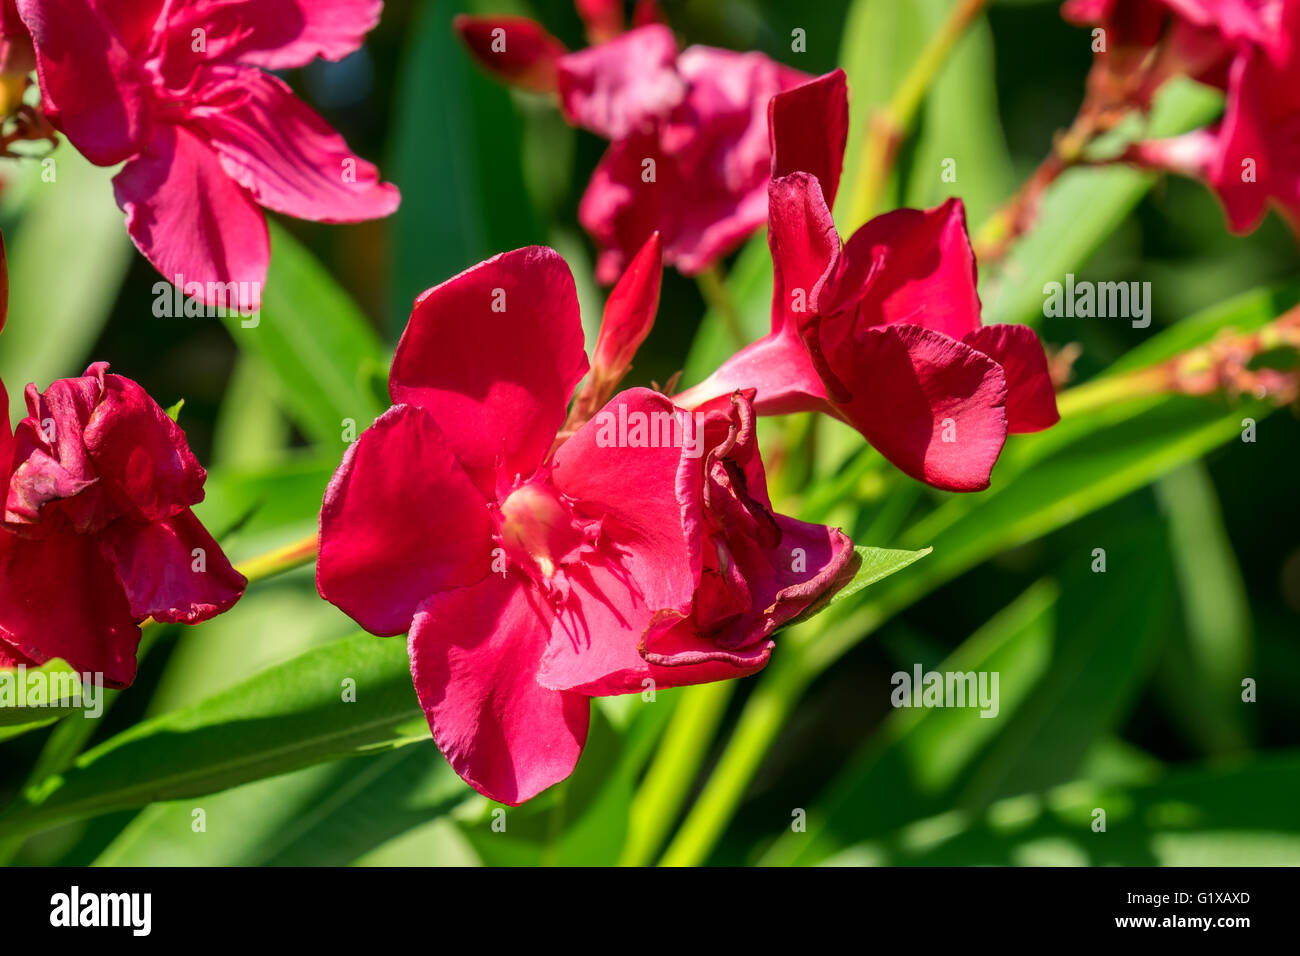 Pink oleander blossoms Stock Photo